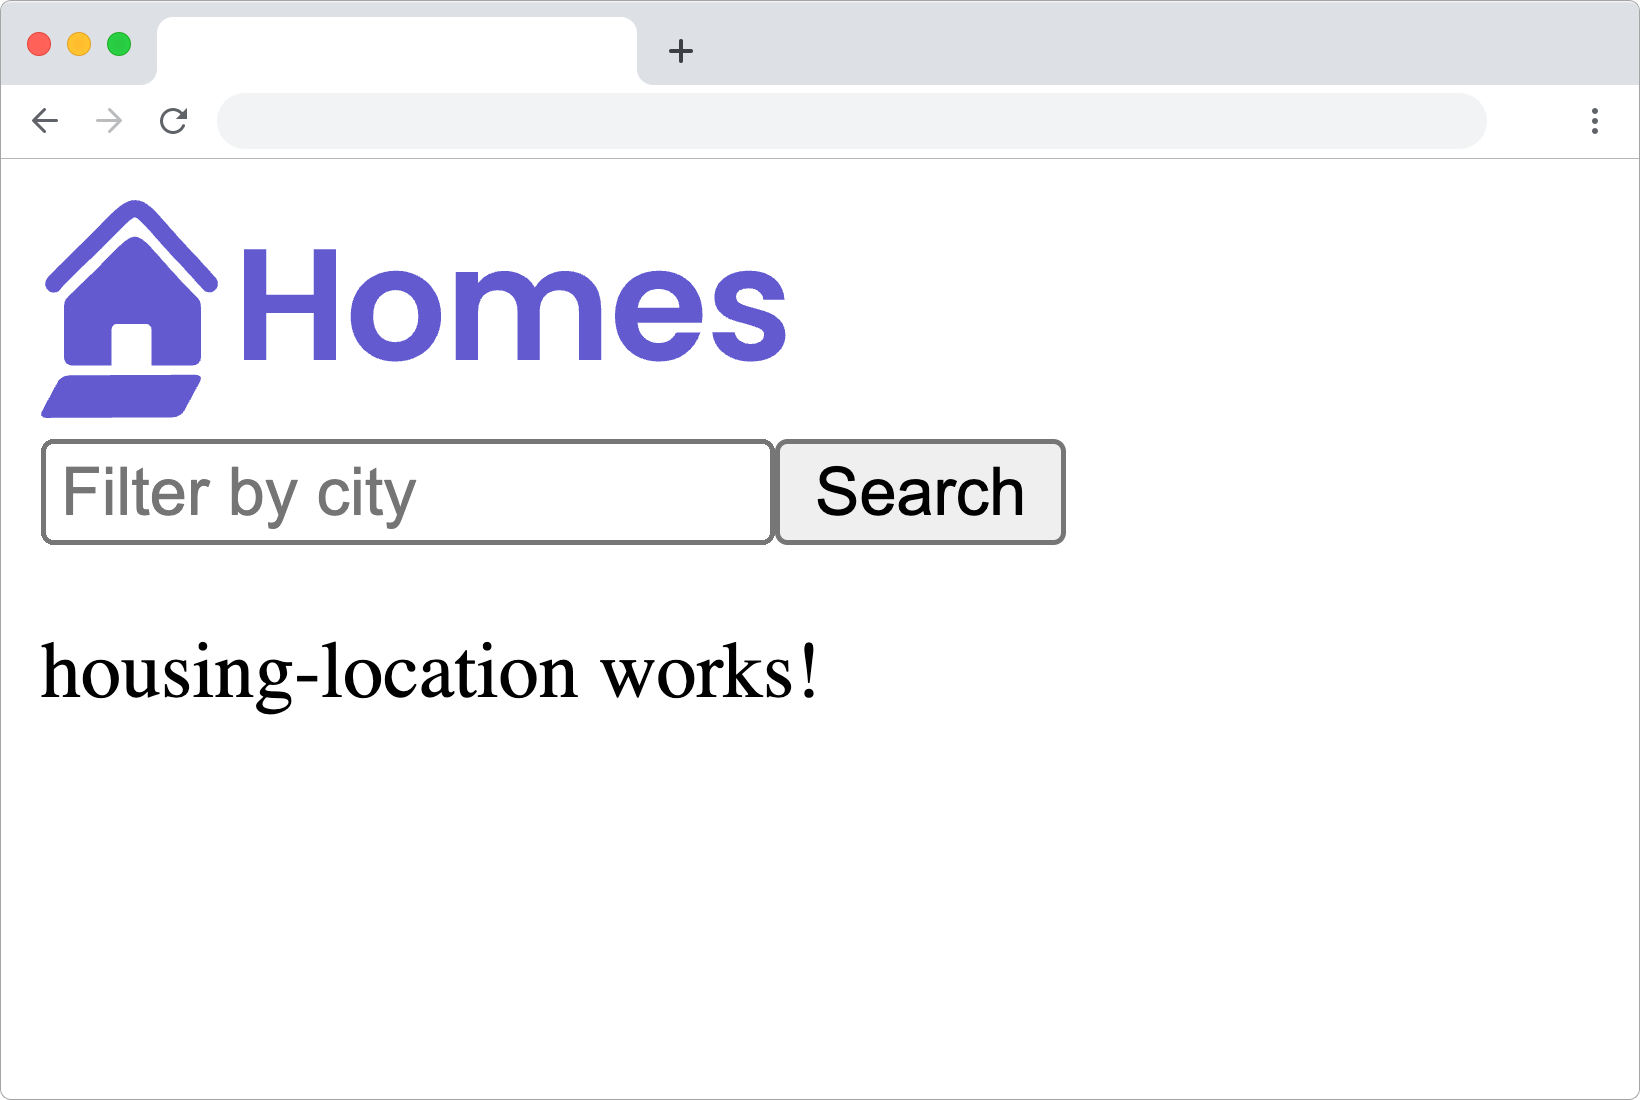 browser frame of homes-app displaying logo, filter text input box and search button and the message 'housing-location works!